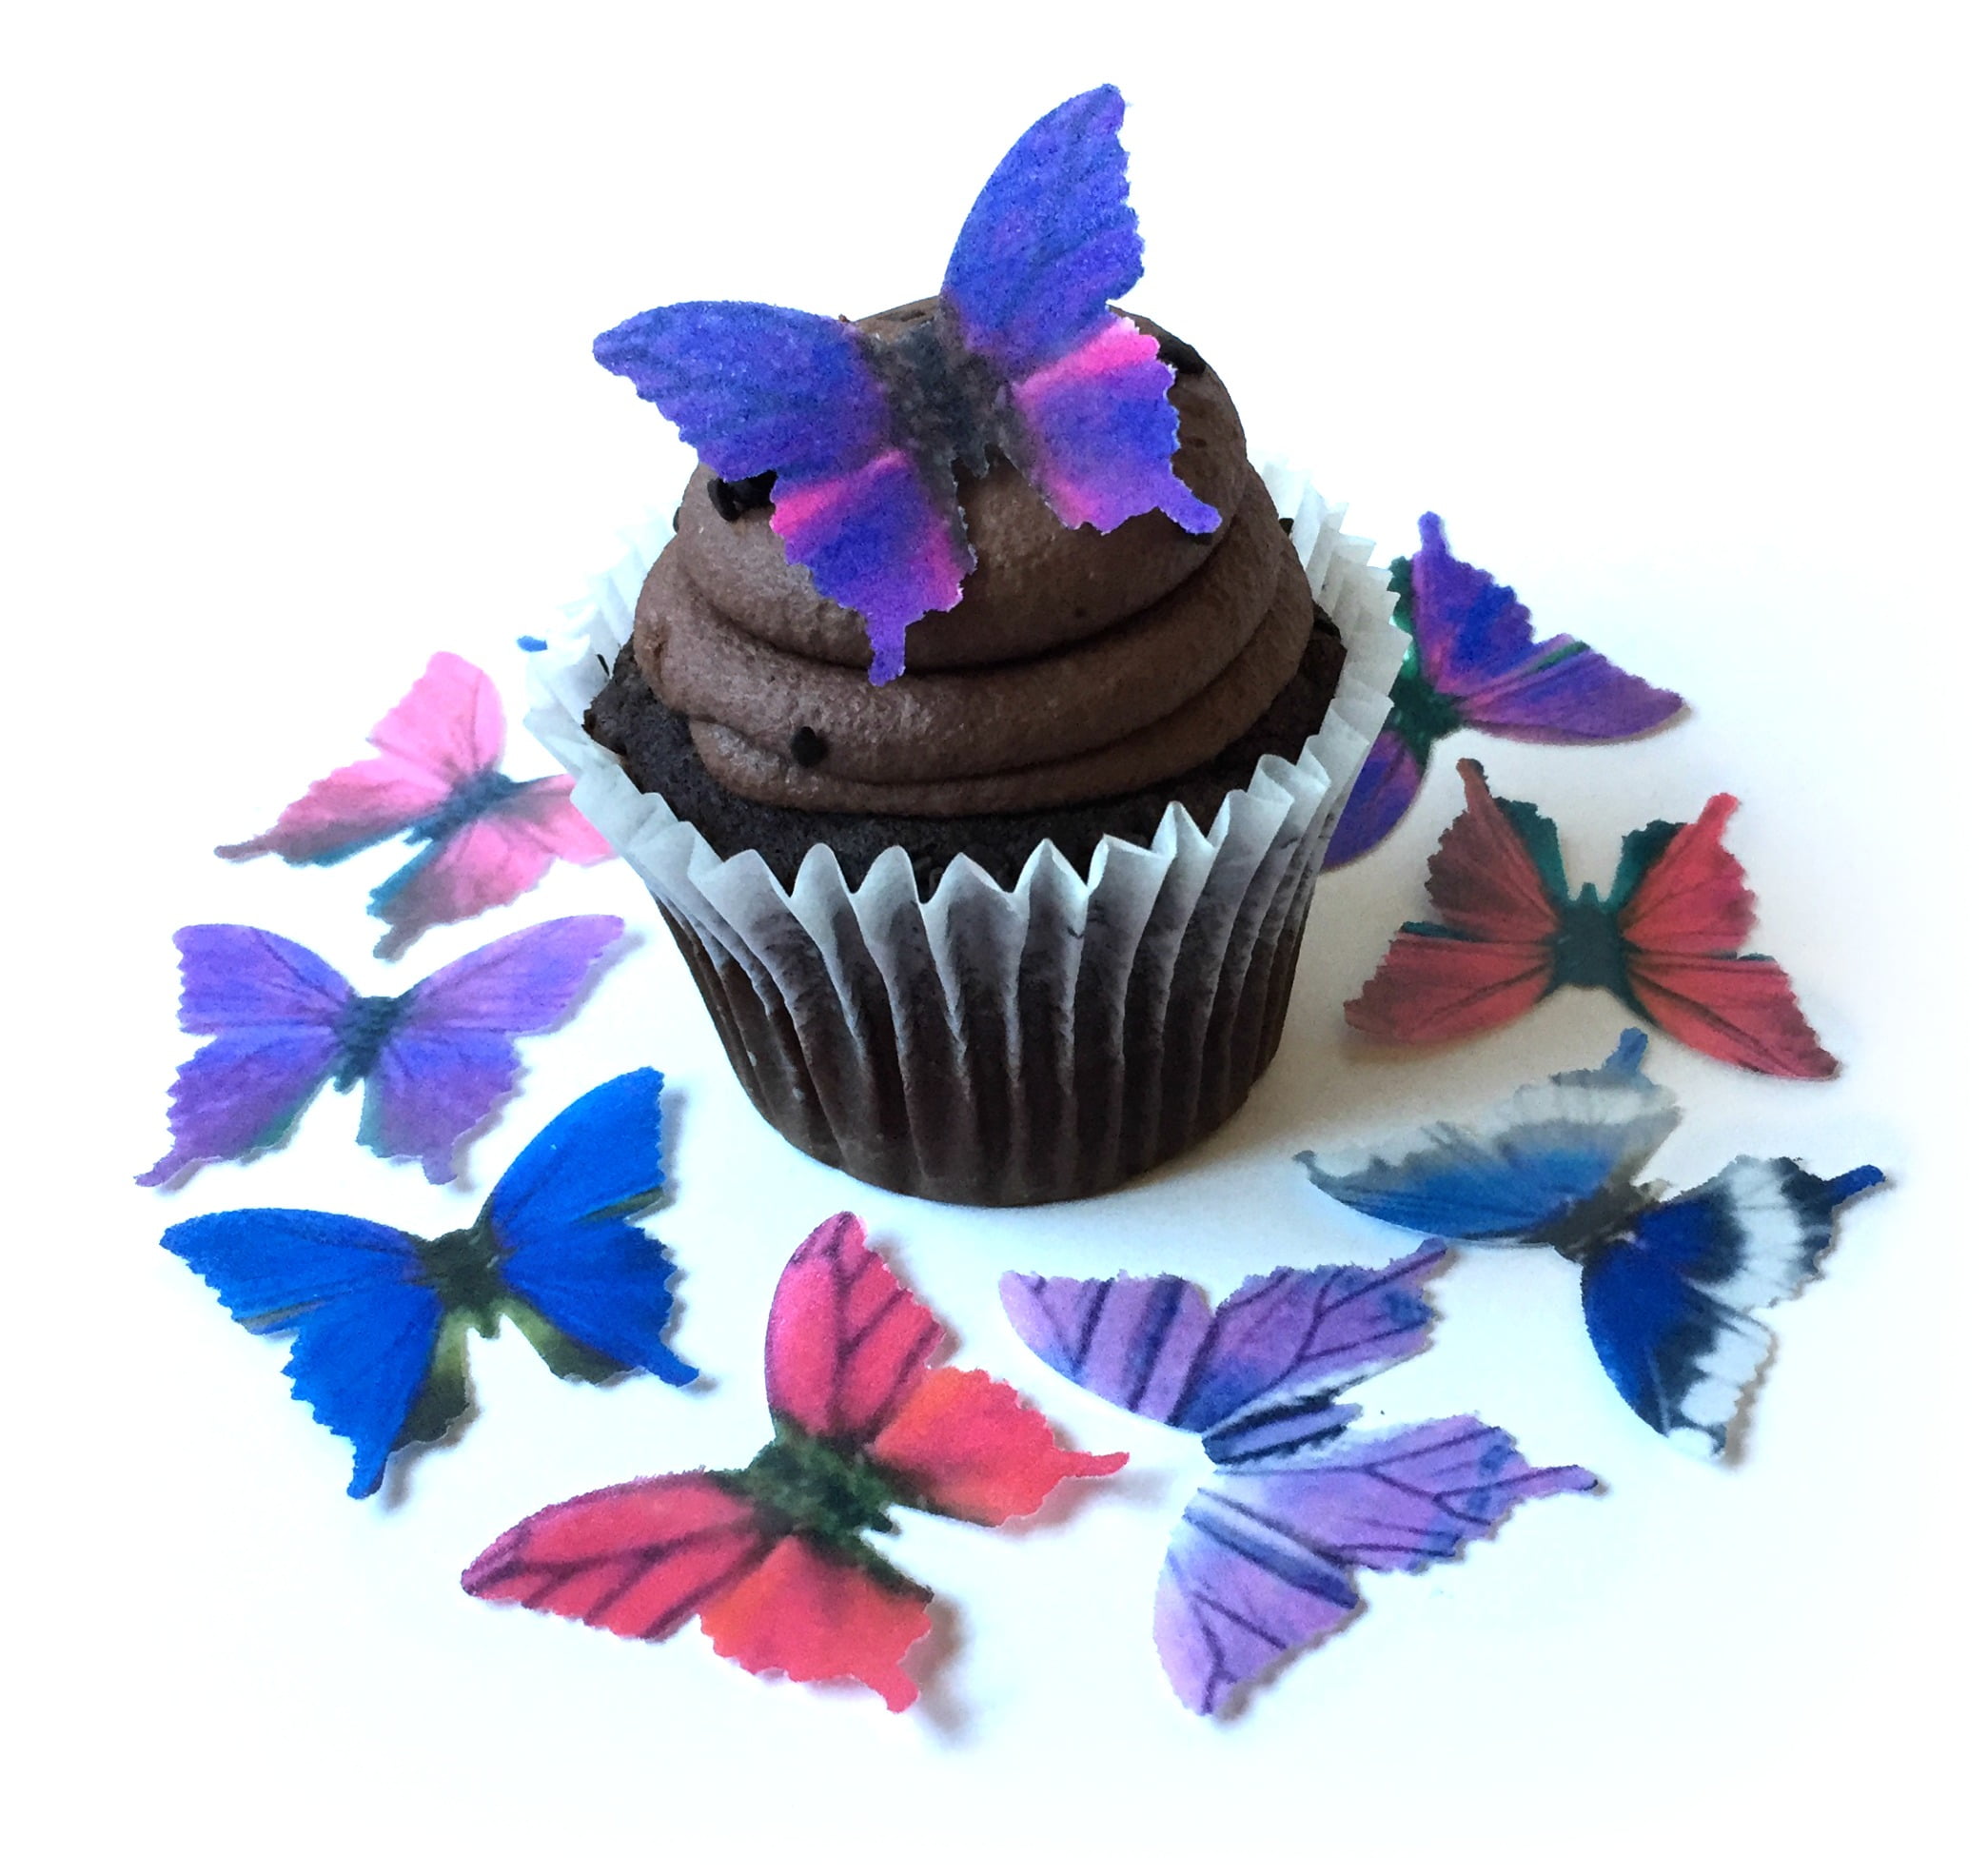 VARIOUS CHOICE OF COLOURS/SIZES PRECUT EDIBLE WAFER BUTTERFLIES CAKE DECORATION 